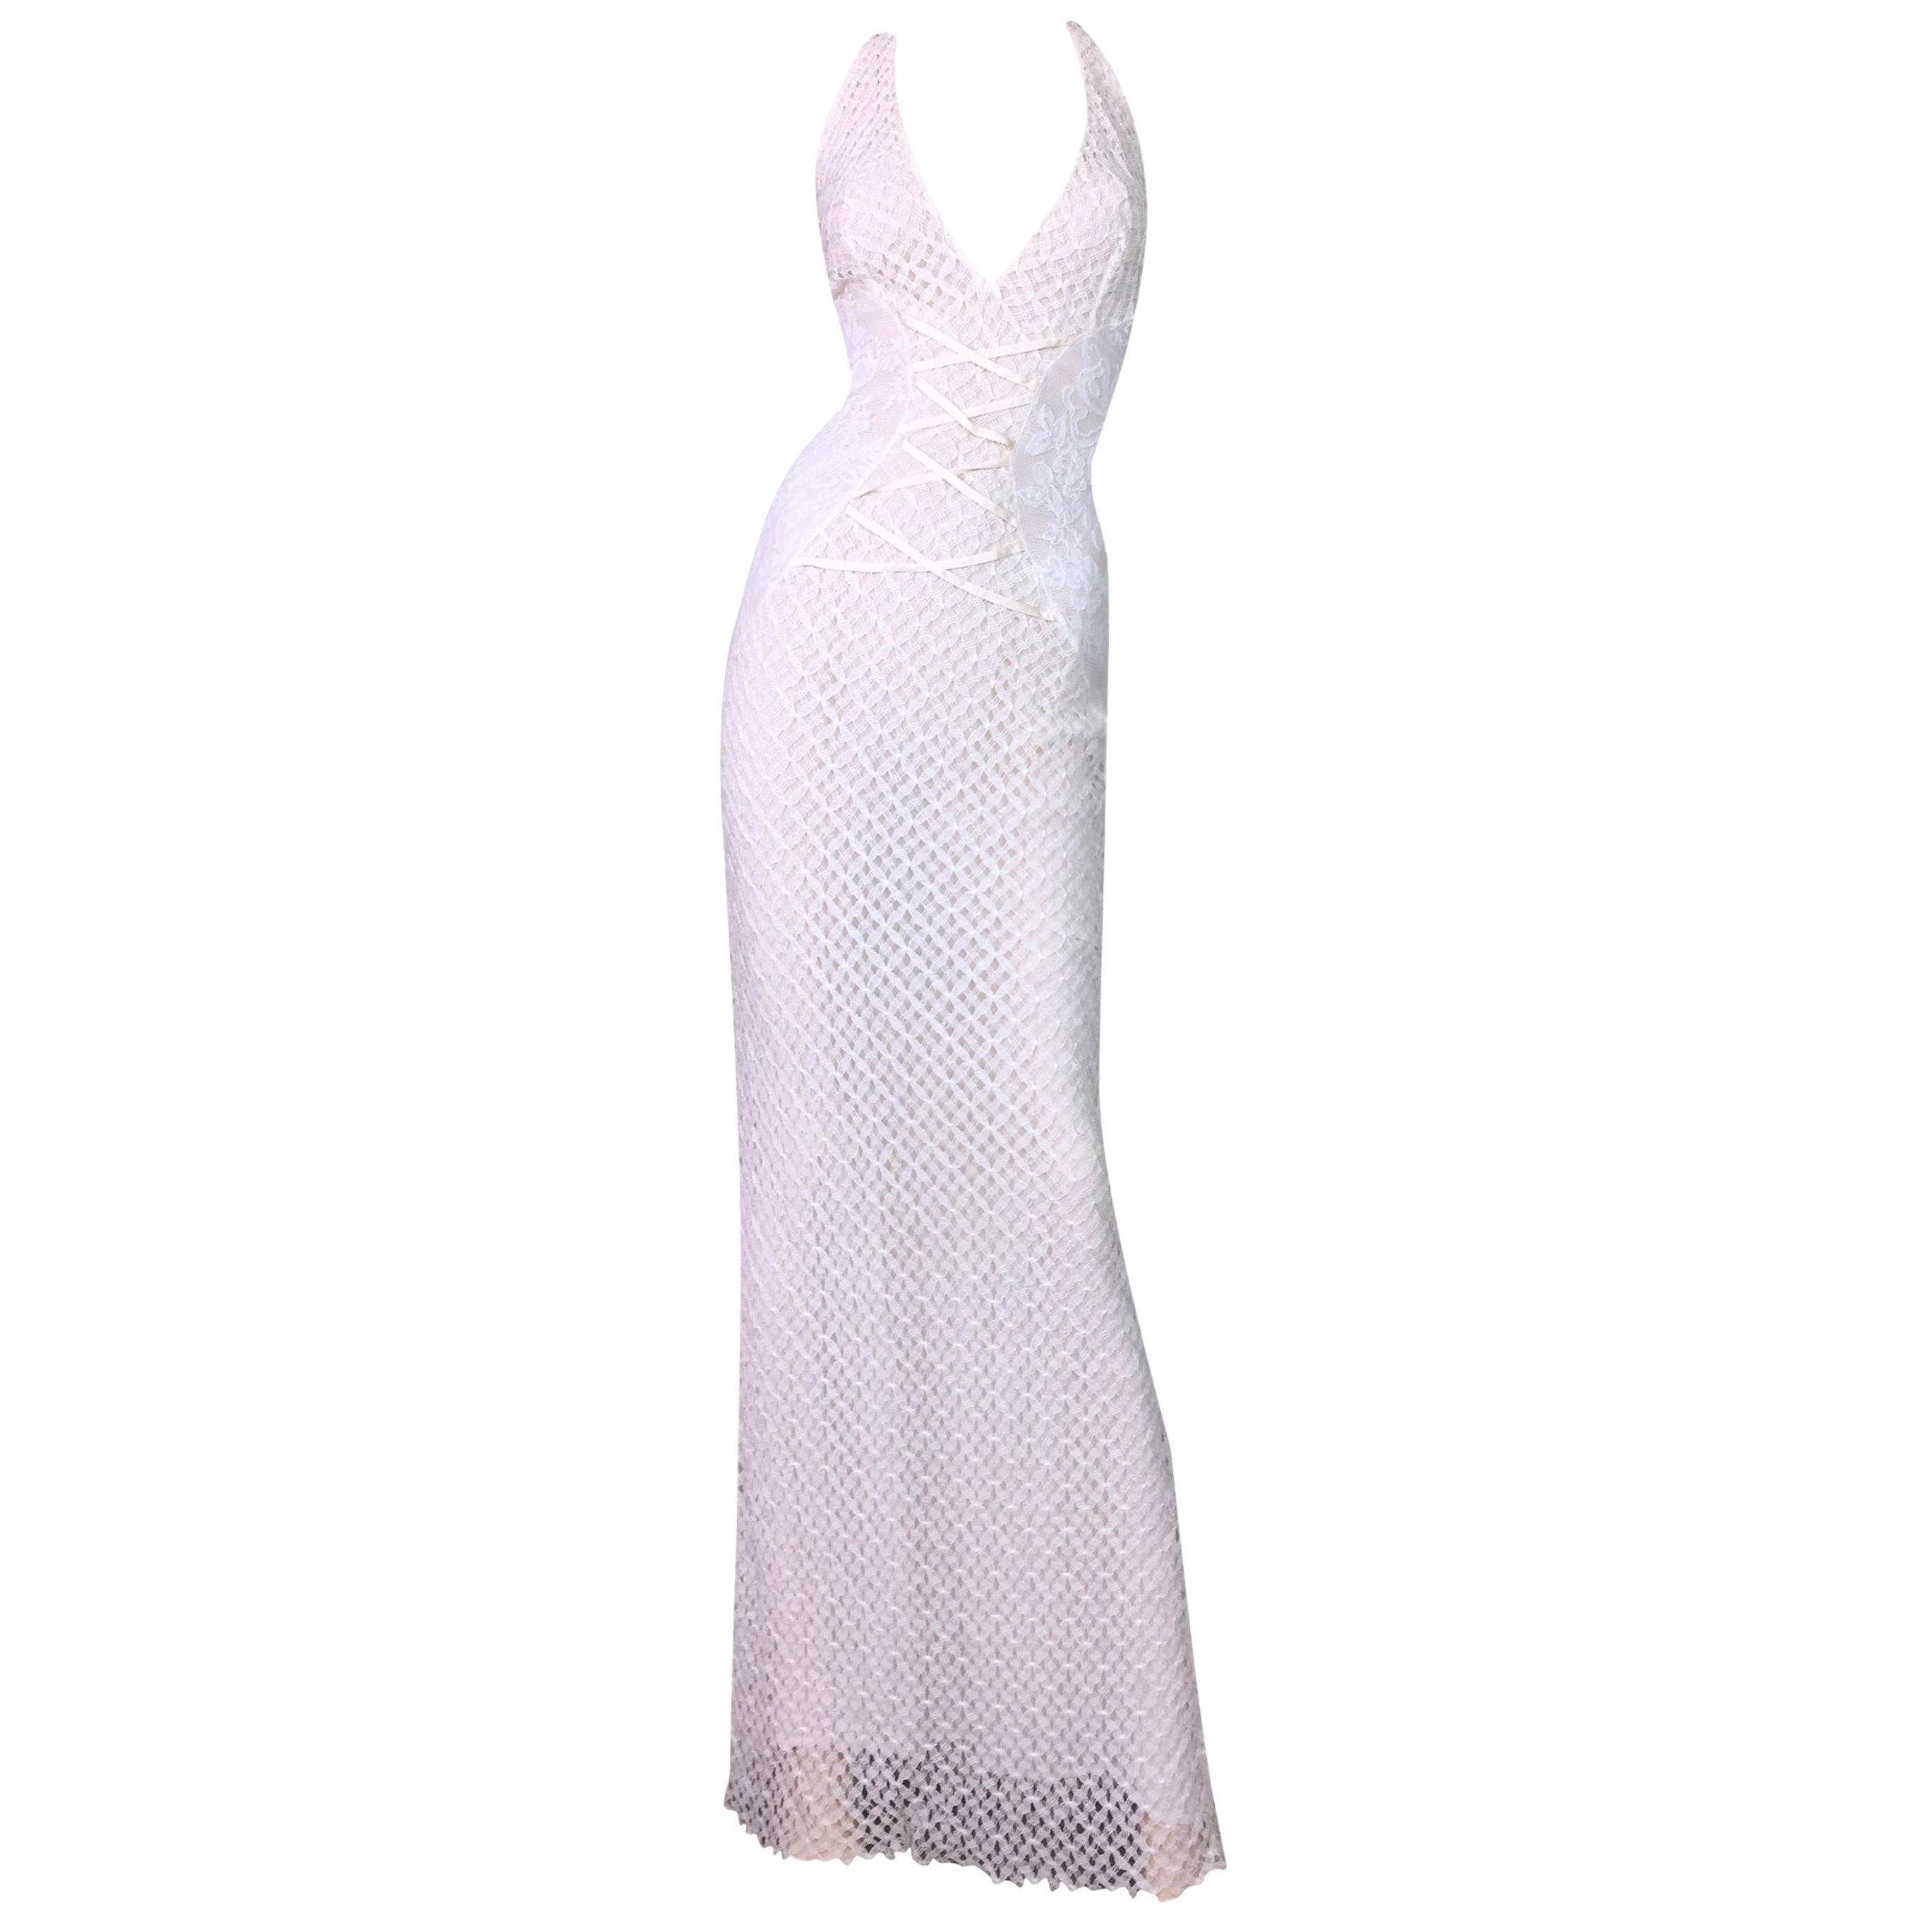 S/S 2002 Gianni Versace Sheer Ivory Plunging Corset Lace Gown Dress